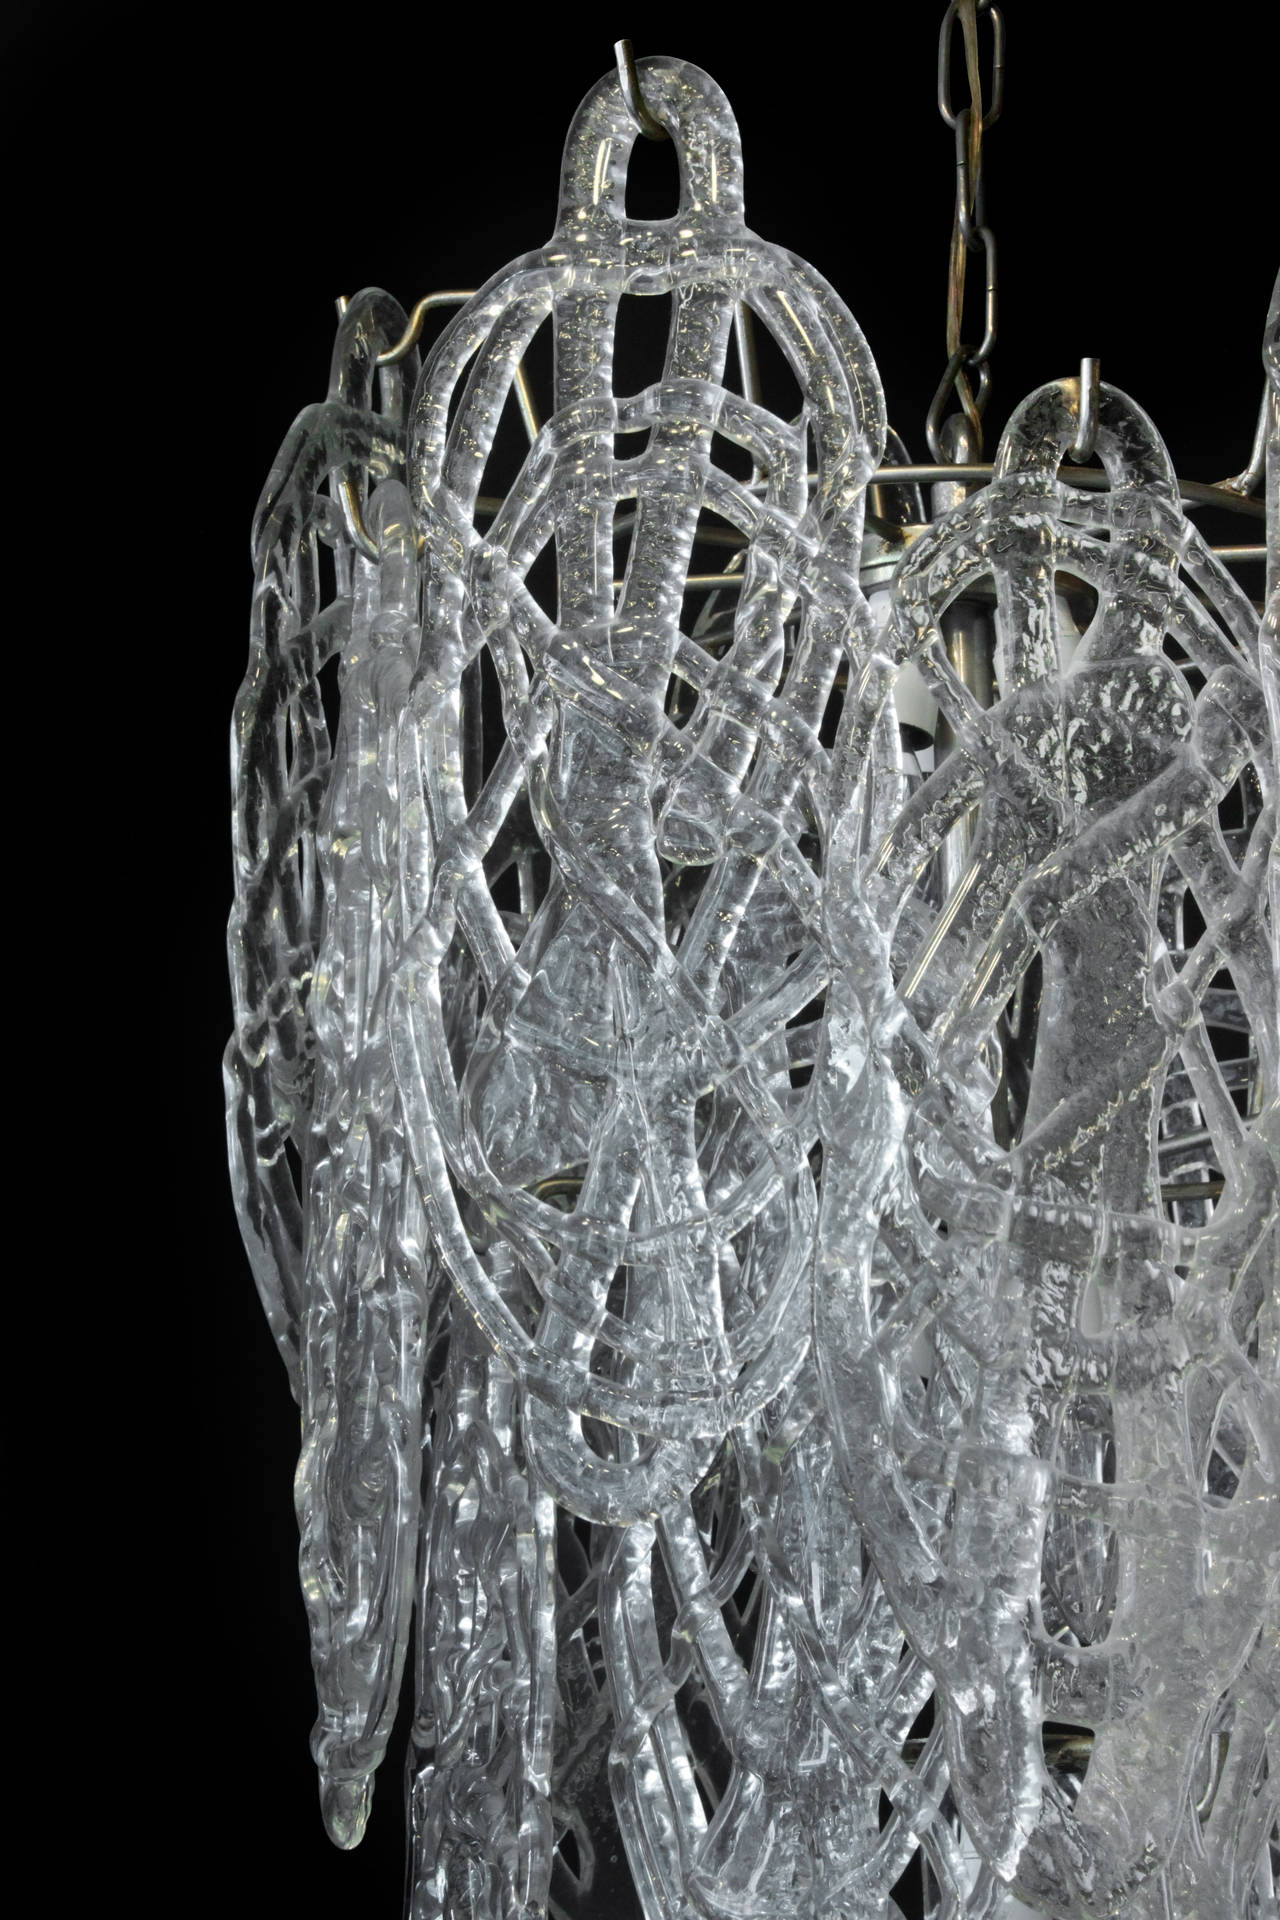 Mid-Century Modern Chandelier with Delicate Dripped Glass Pieces by Mazzega